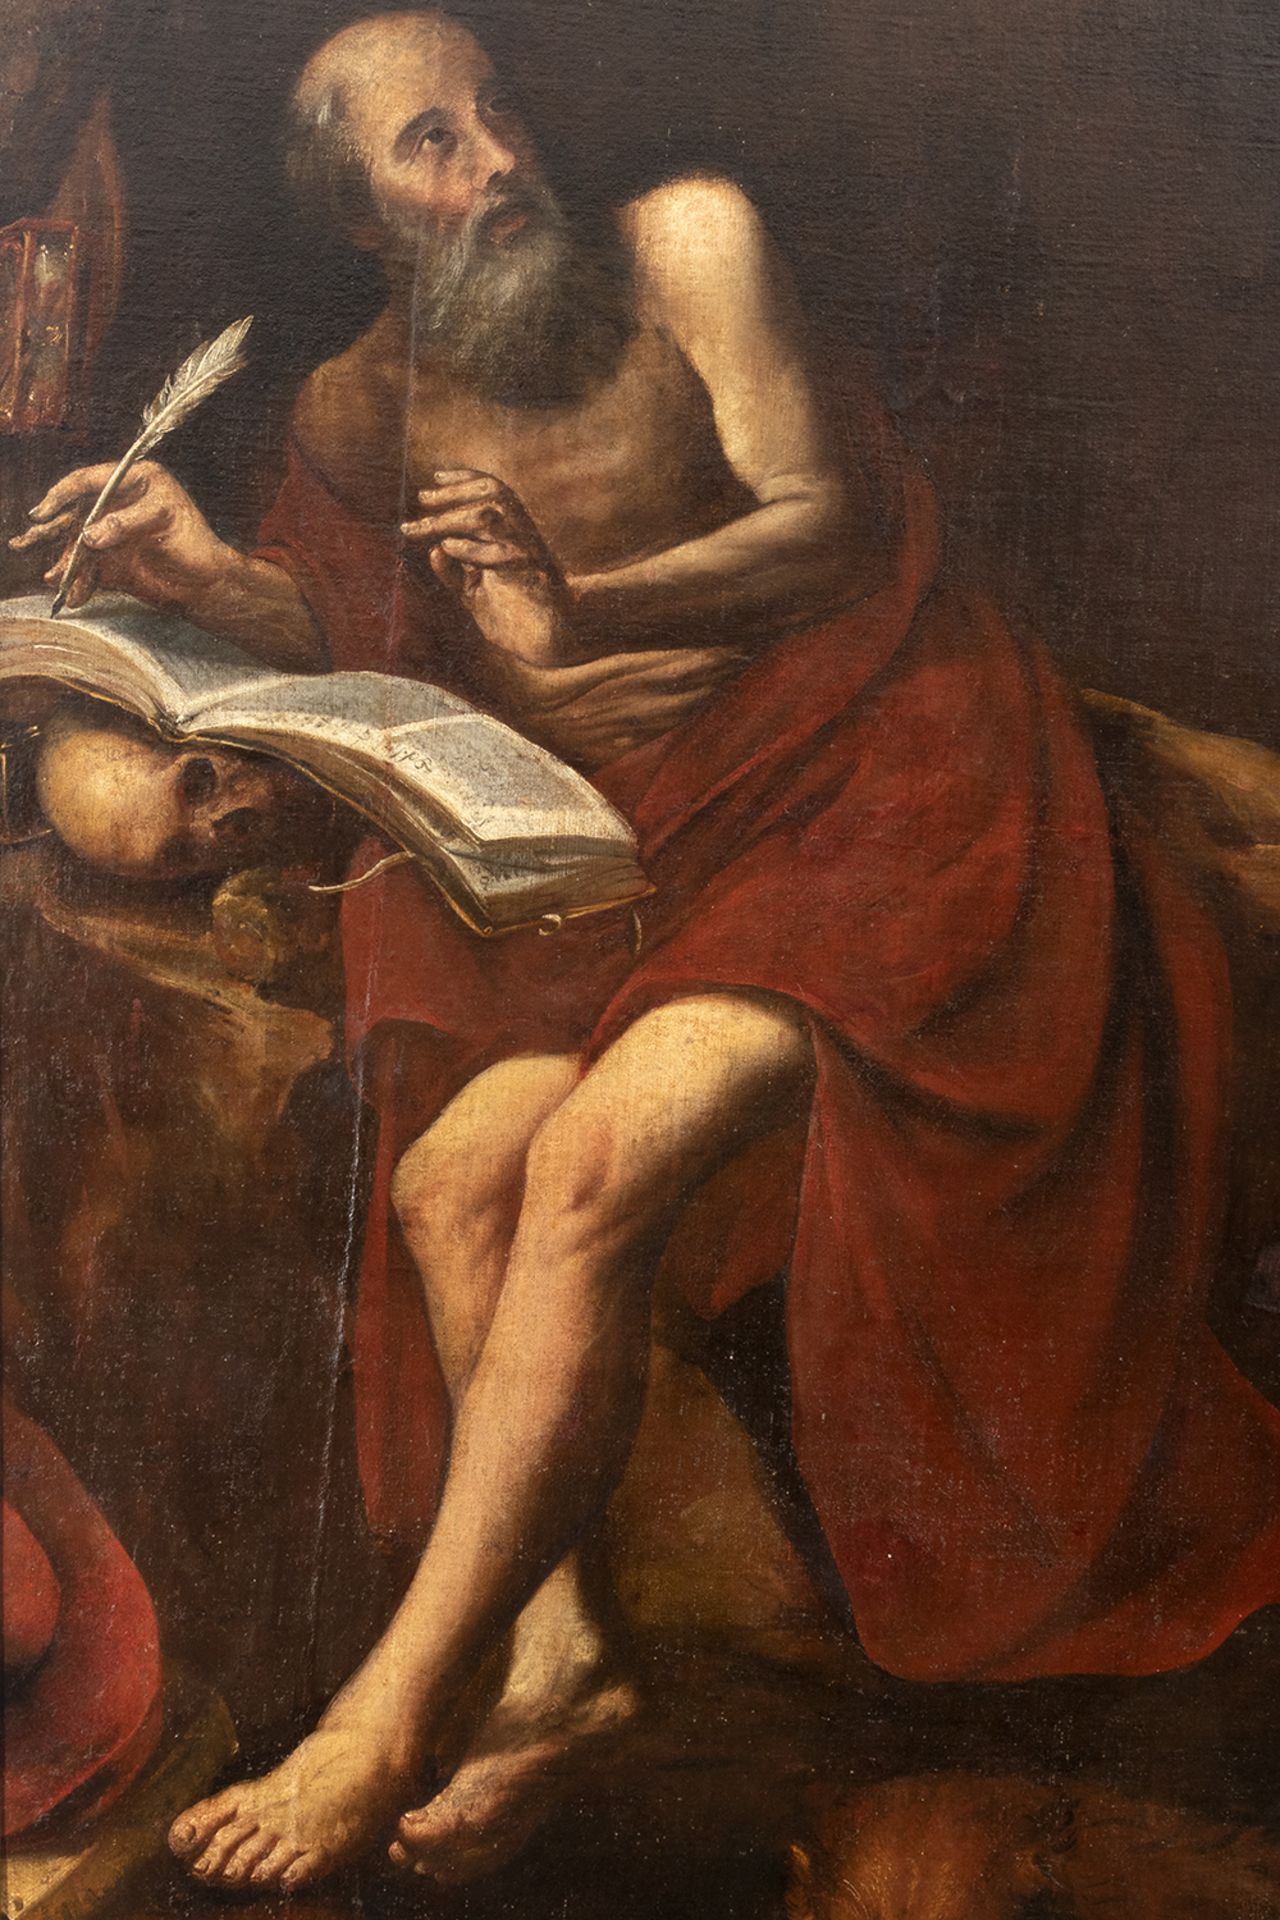 Andalusian school, 17th century. Penitent Saint Jerome. - Image 2 of 5